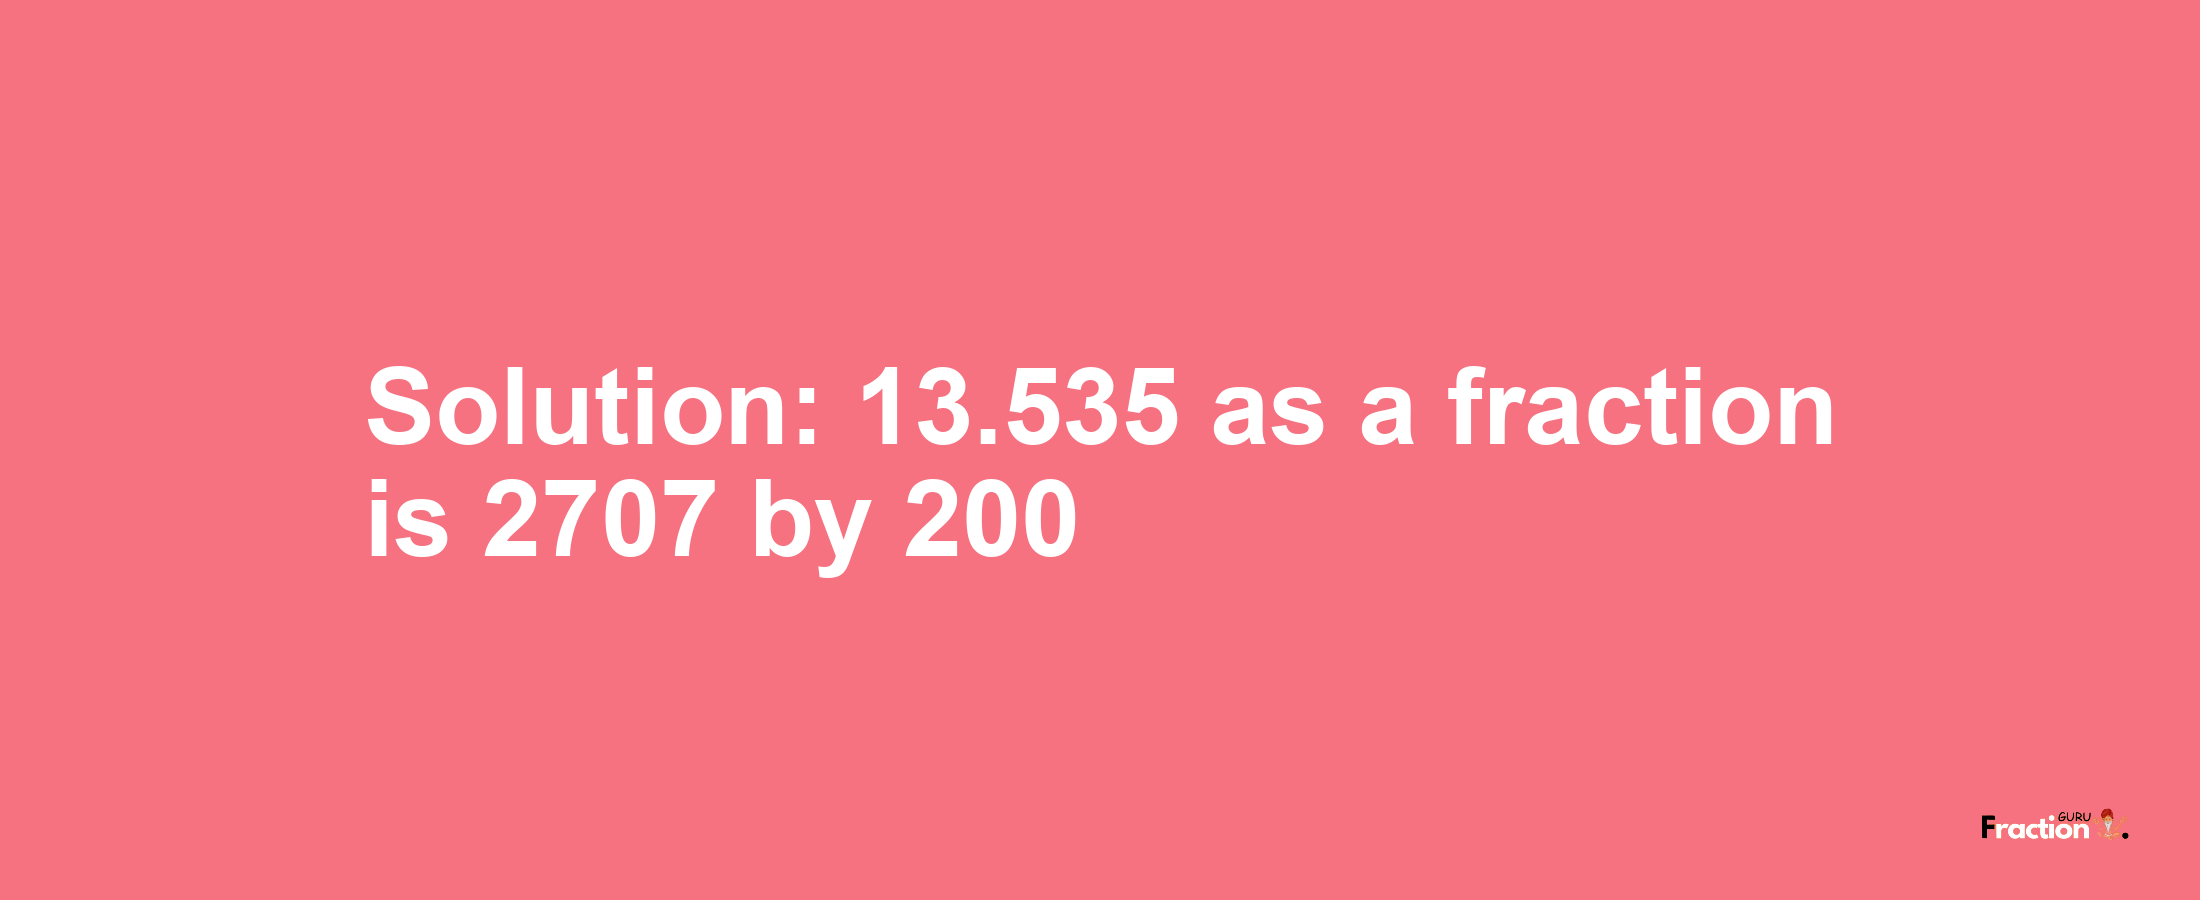 Solution:13.535 as a fraction is 2707/200